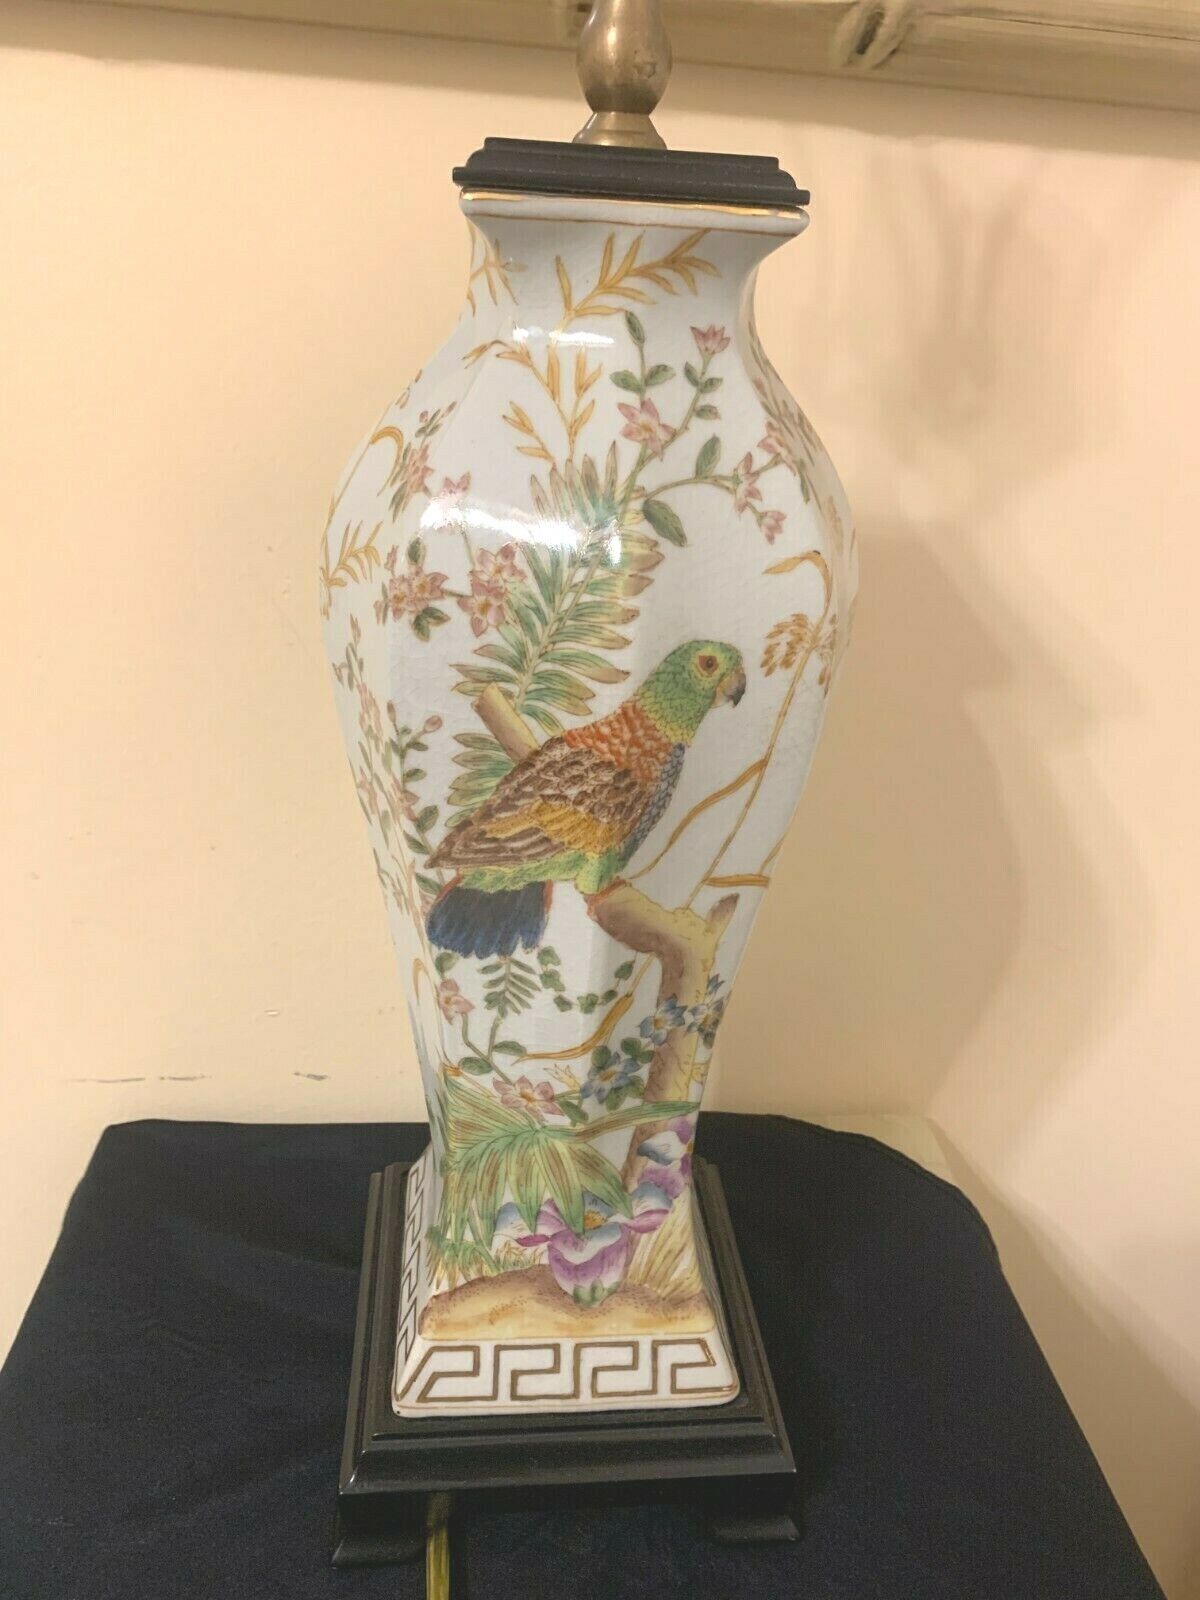 A TABLE LAMP  PORCELAIN  TRADITIONAL   WITH PARROT PAINTING DECOR  AND WOOD BASE